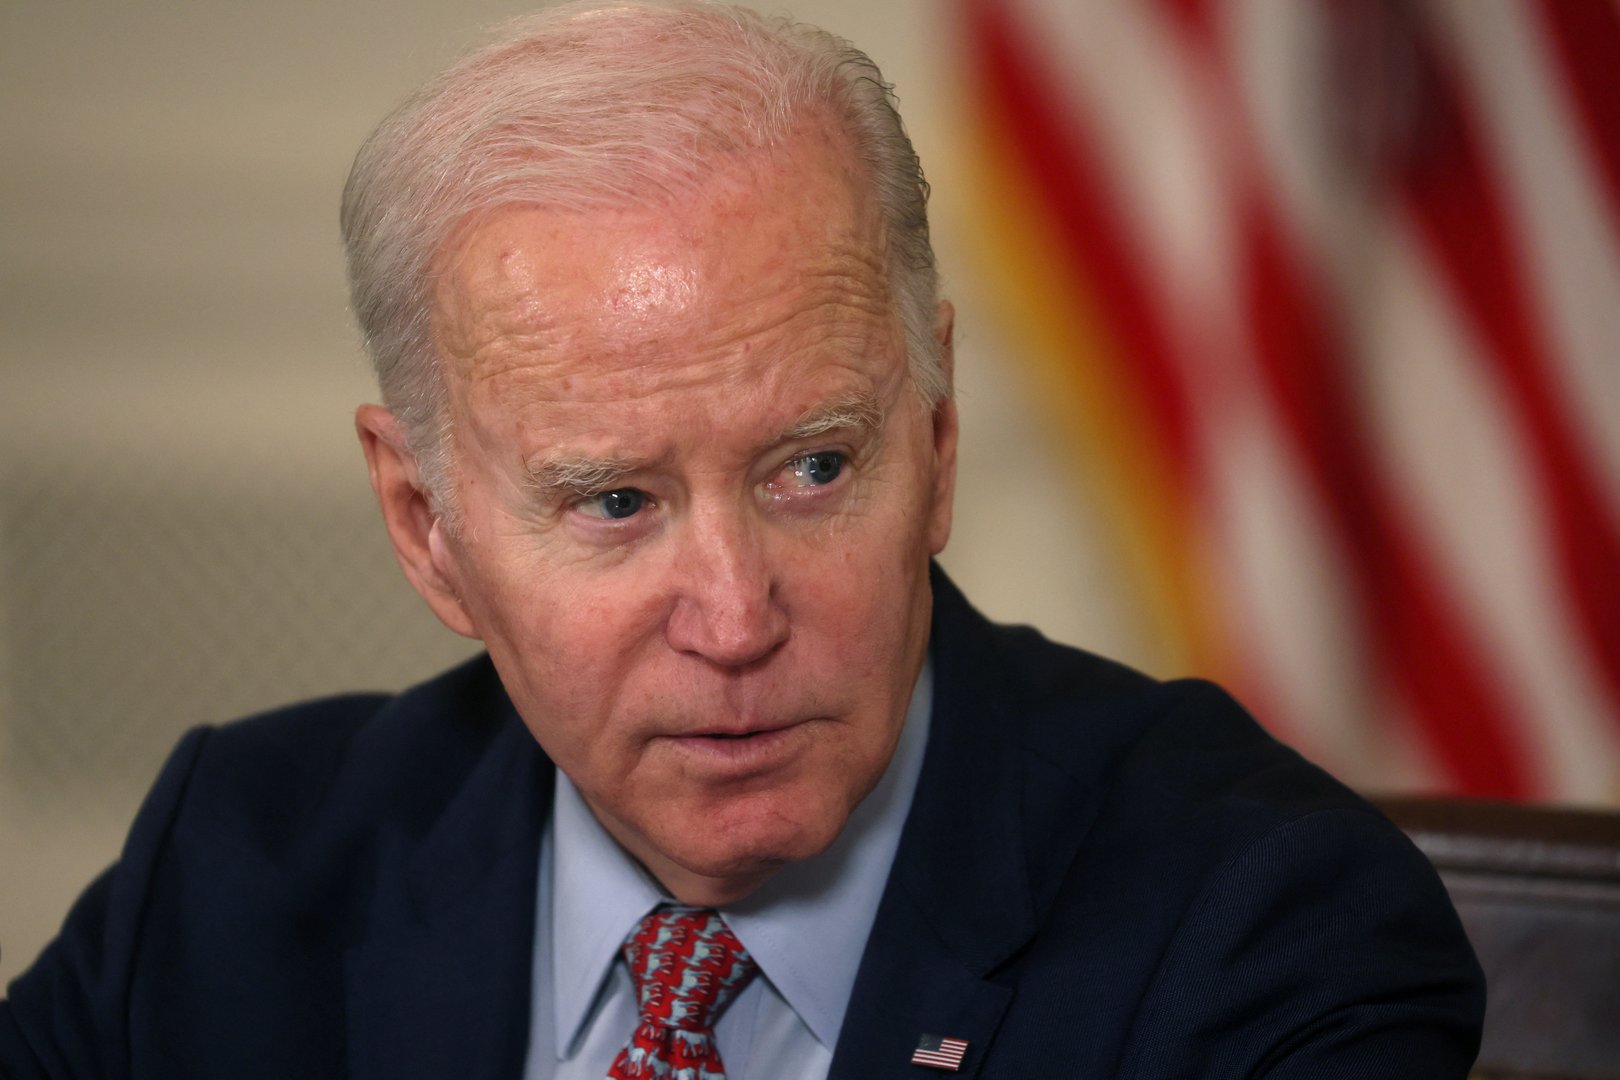 image Biden eyes AI dangers, says tech companies must make sure products are safe